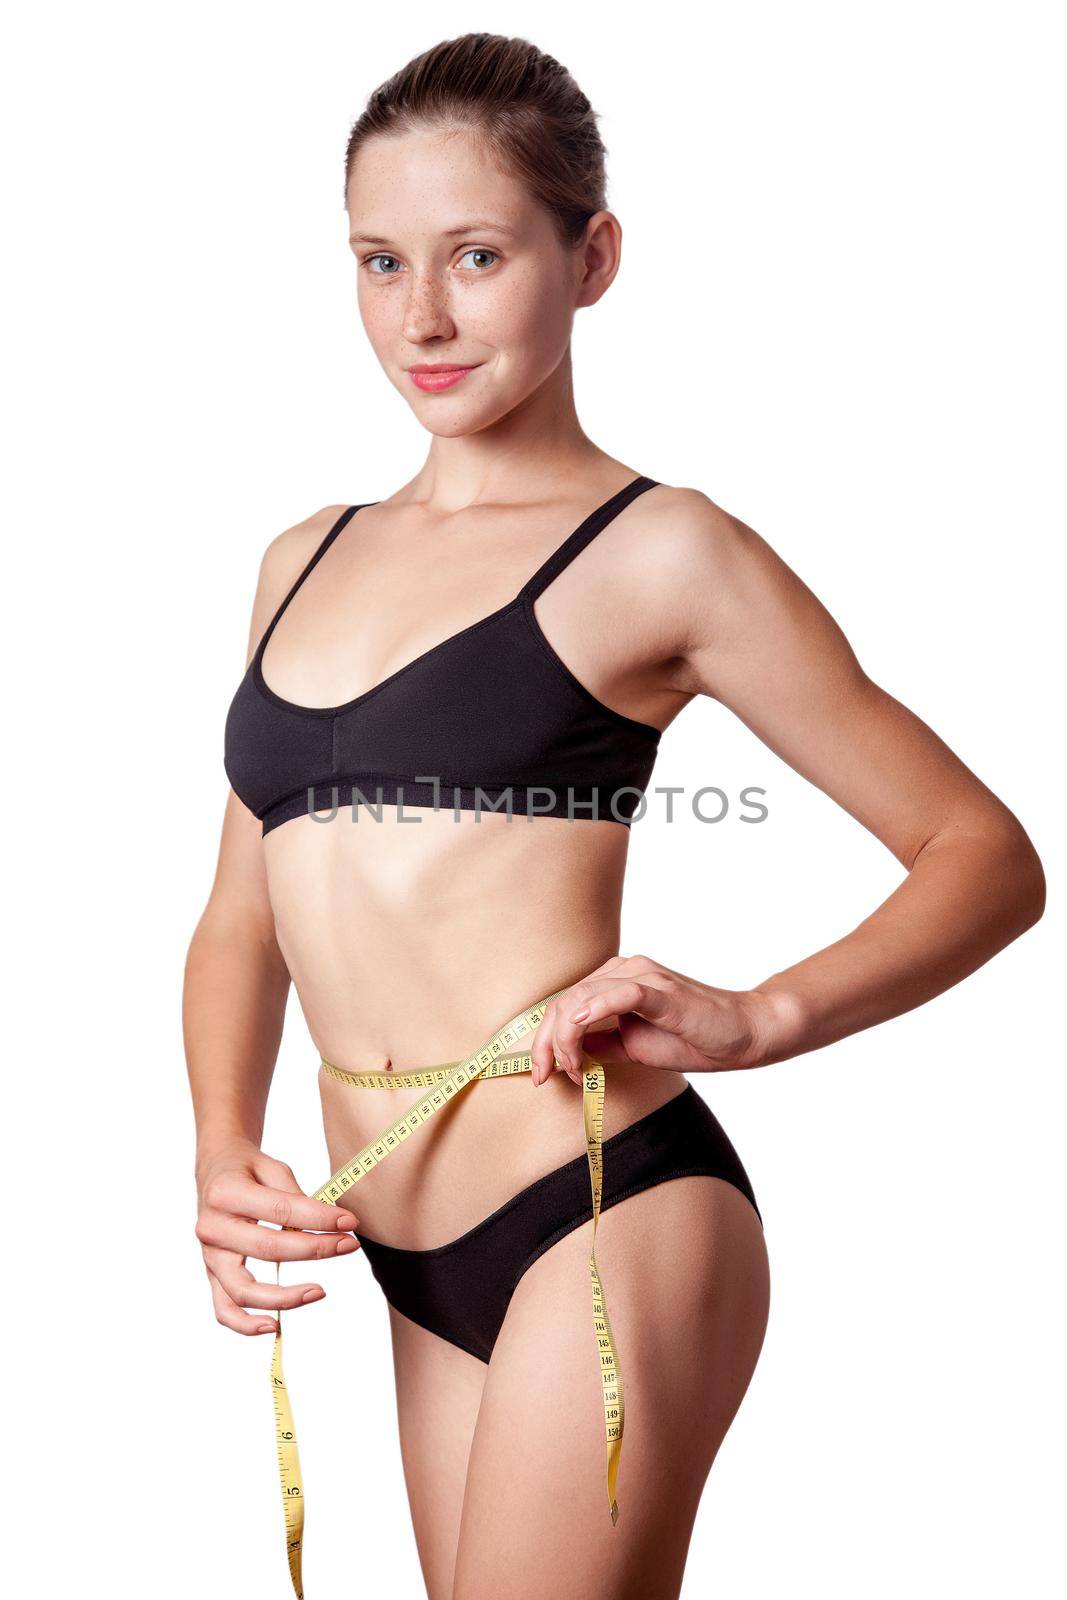 Slim fit happy young woman with measure tape measuring her waist with black underwear, isolated on white background. studio shot.